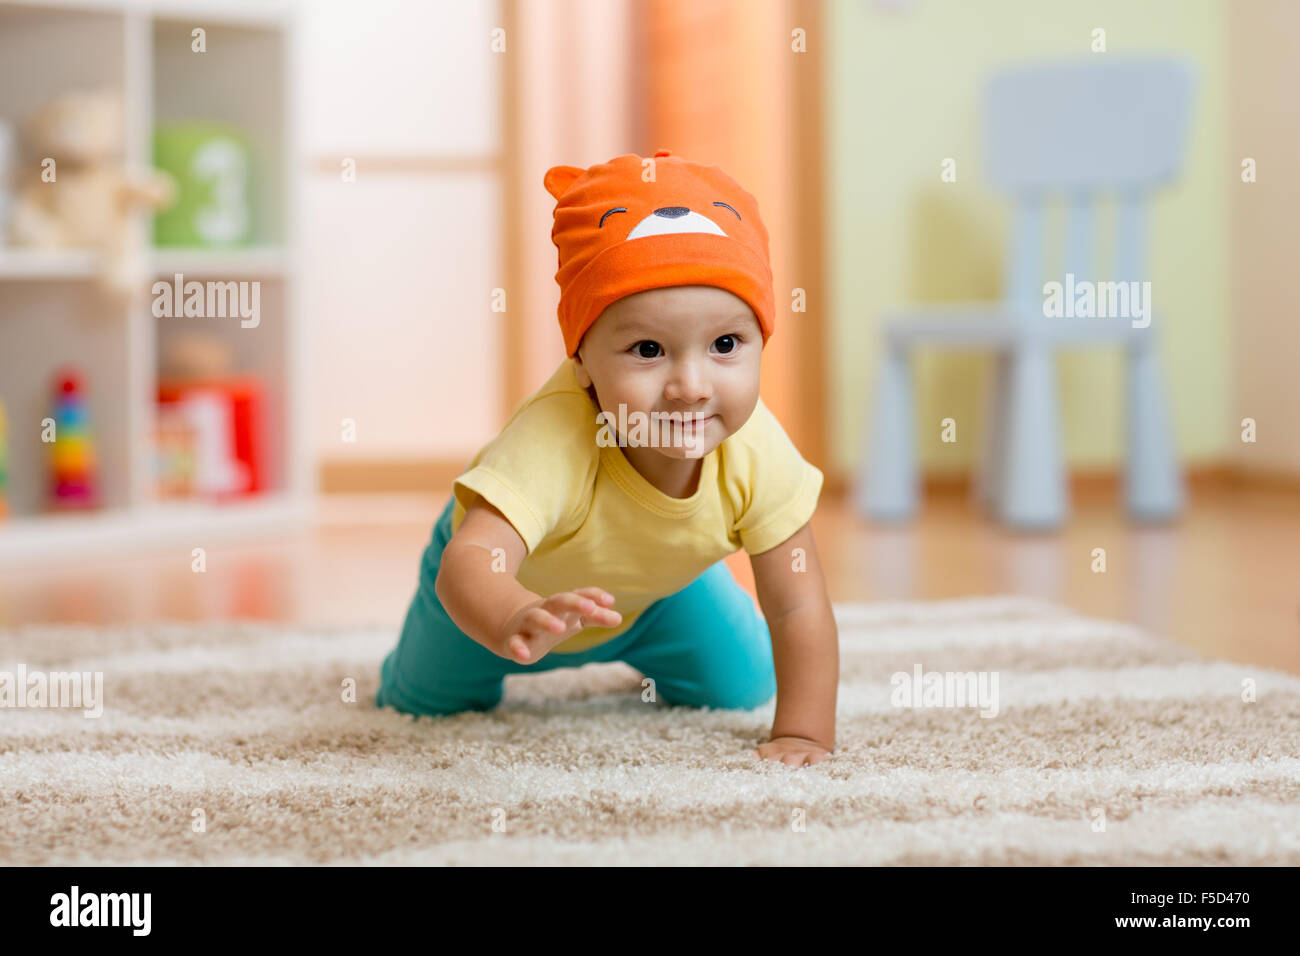 crawling baby boy at home on floor Stock Photo